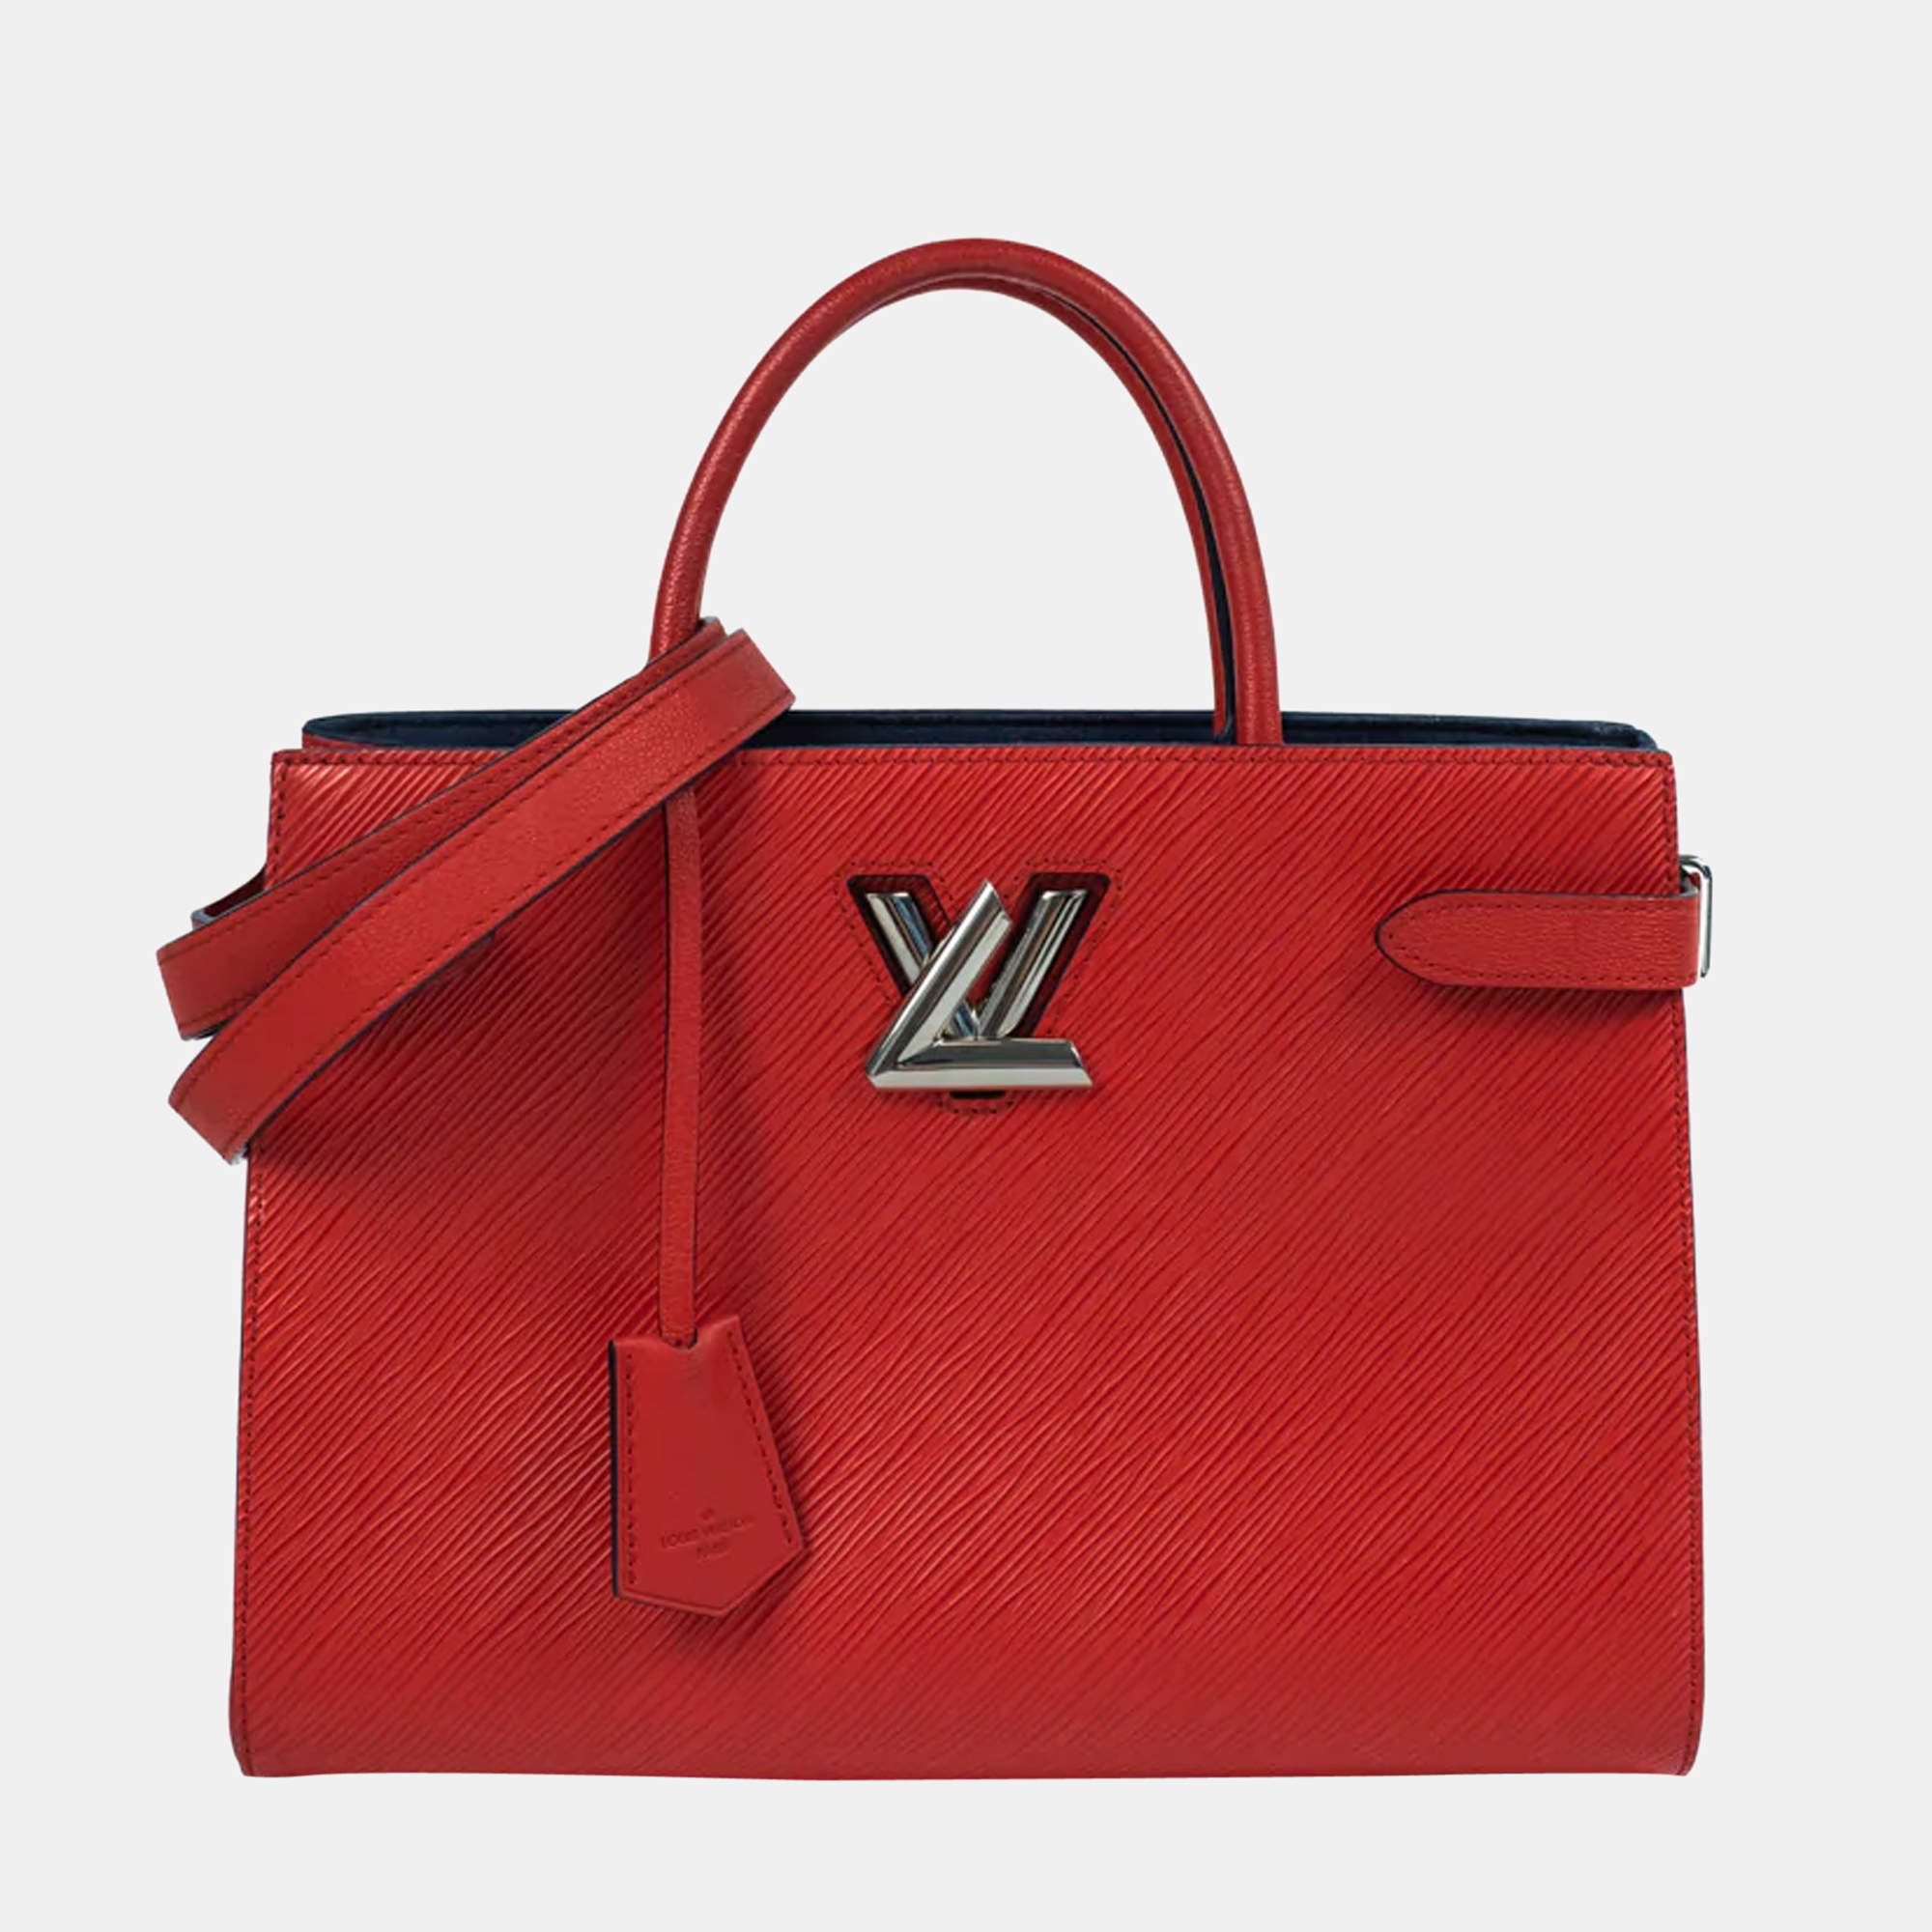 Louis Vuitton Twist Tote Shoulder bag in Red Epi Leather